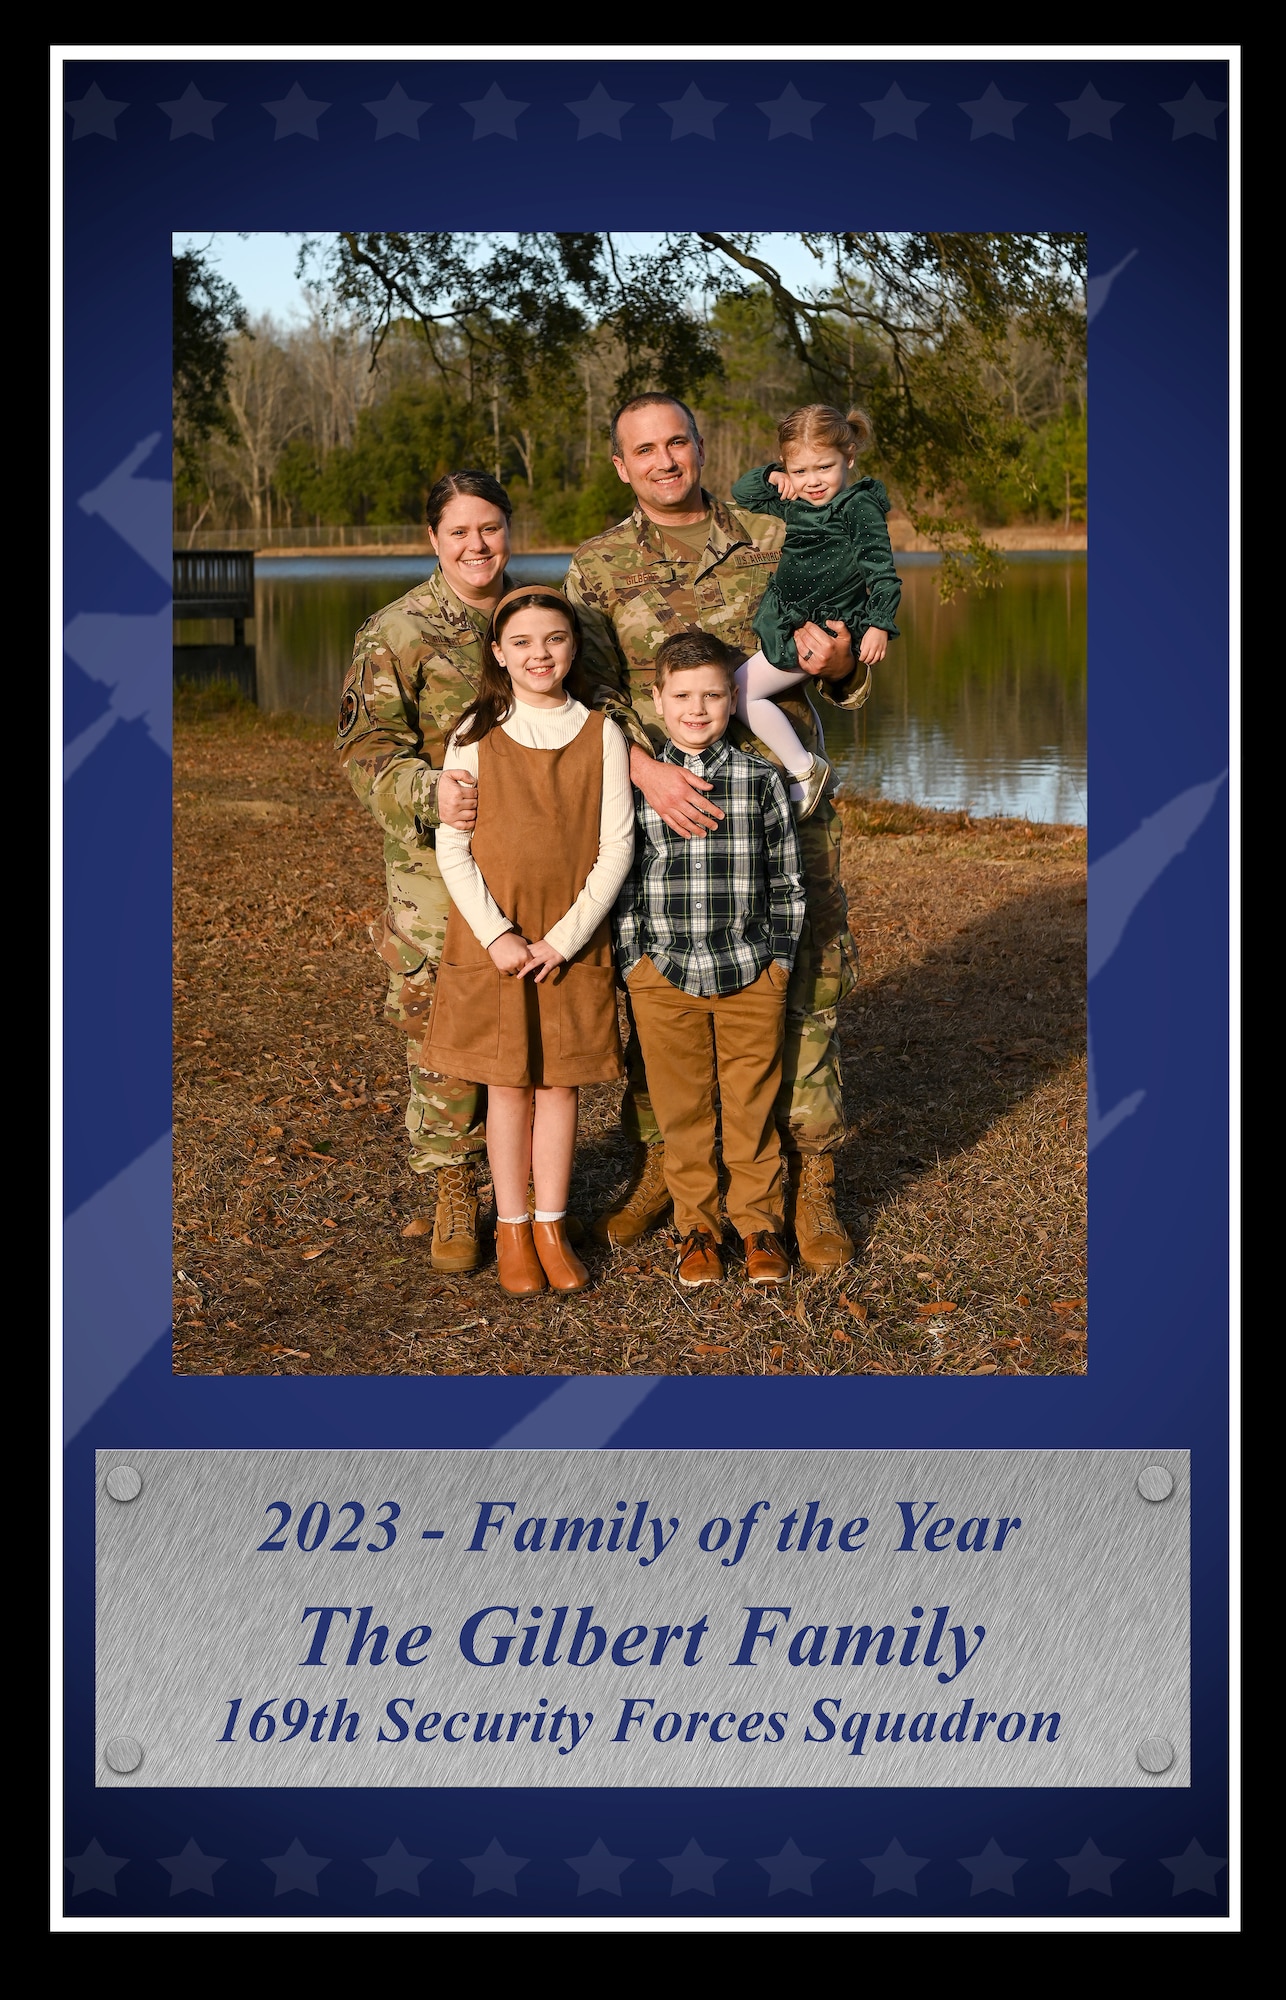 Portrait of the Gilbert Family, 2023 Family of the Year.